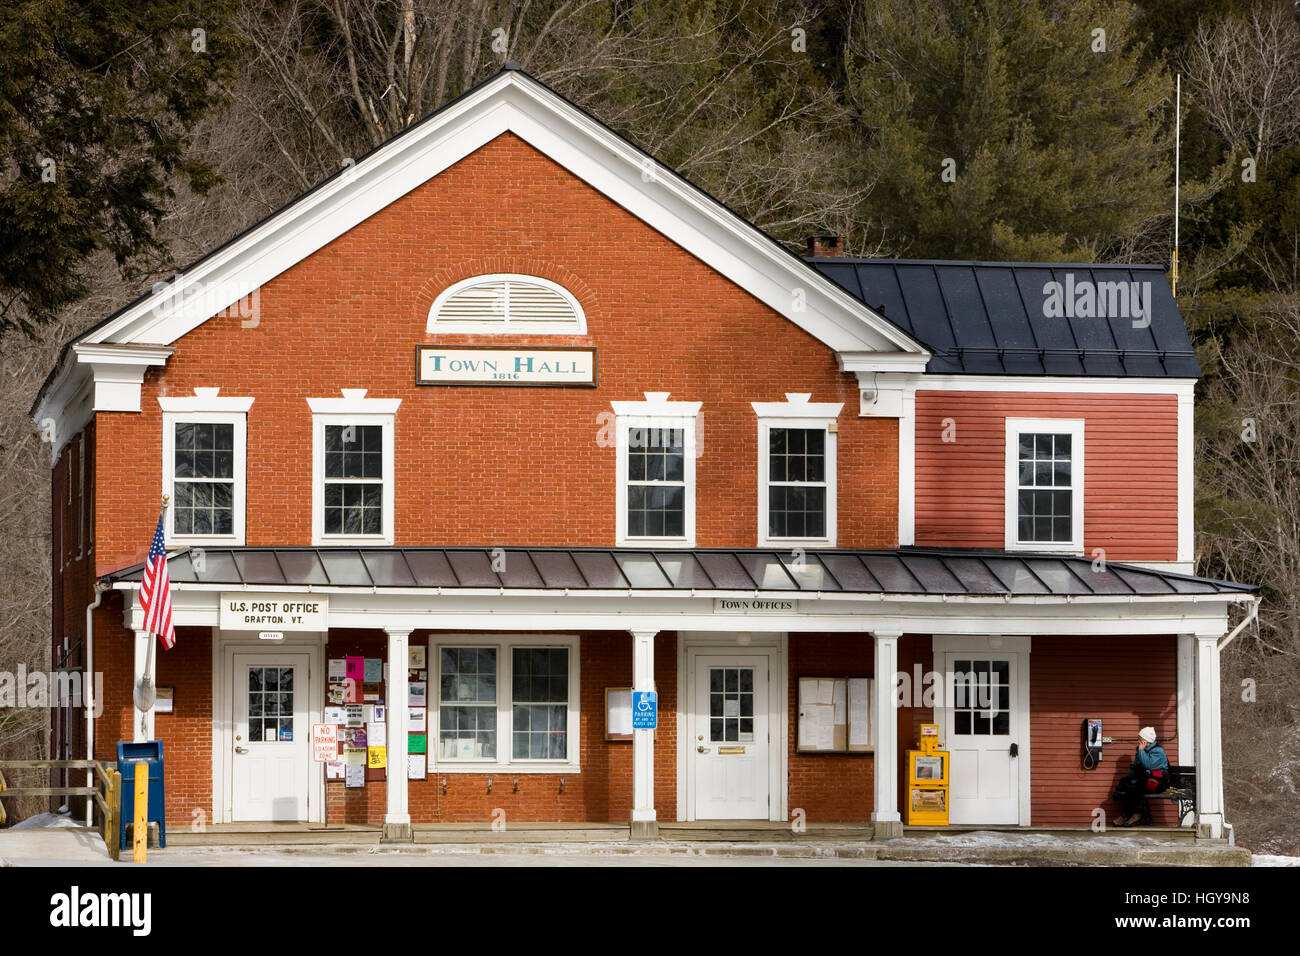 The Grafton, Vermont town hall and post office. Stock Photo